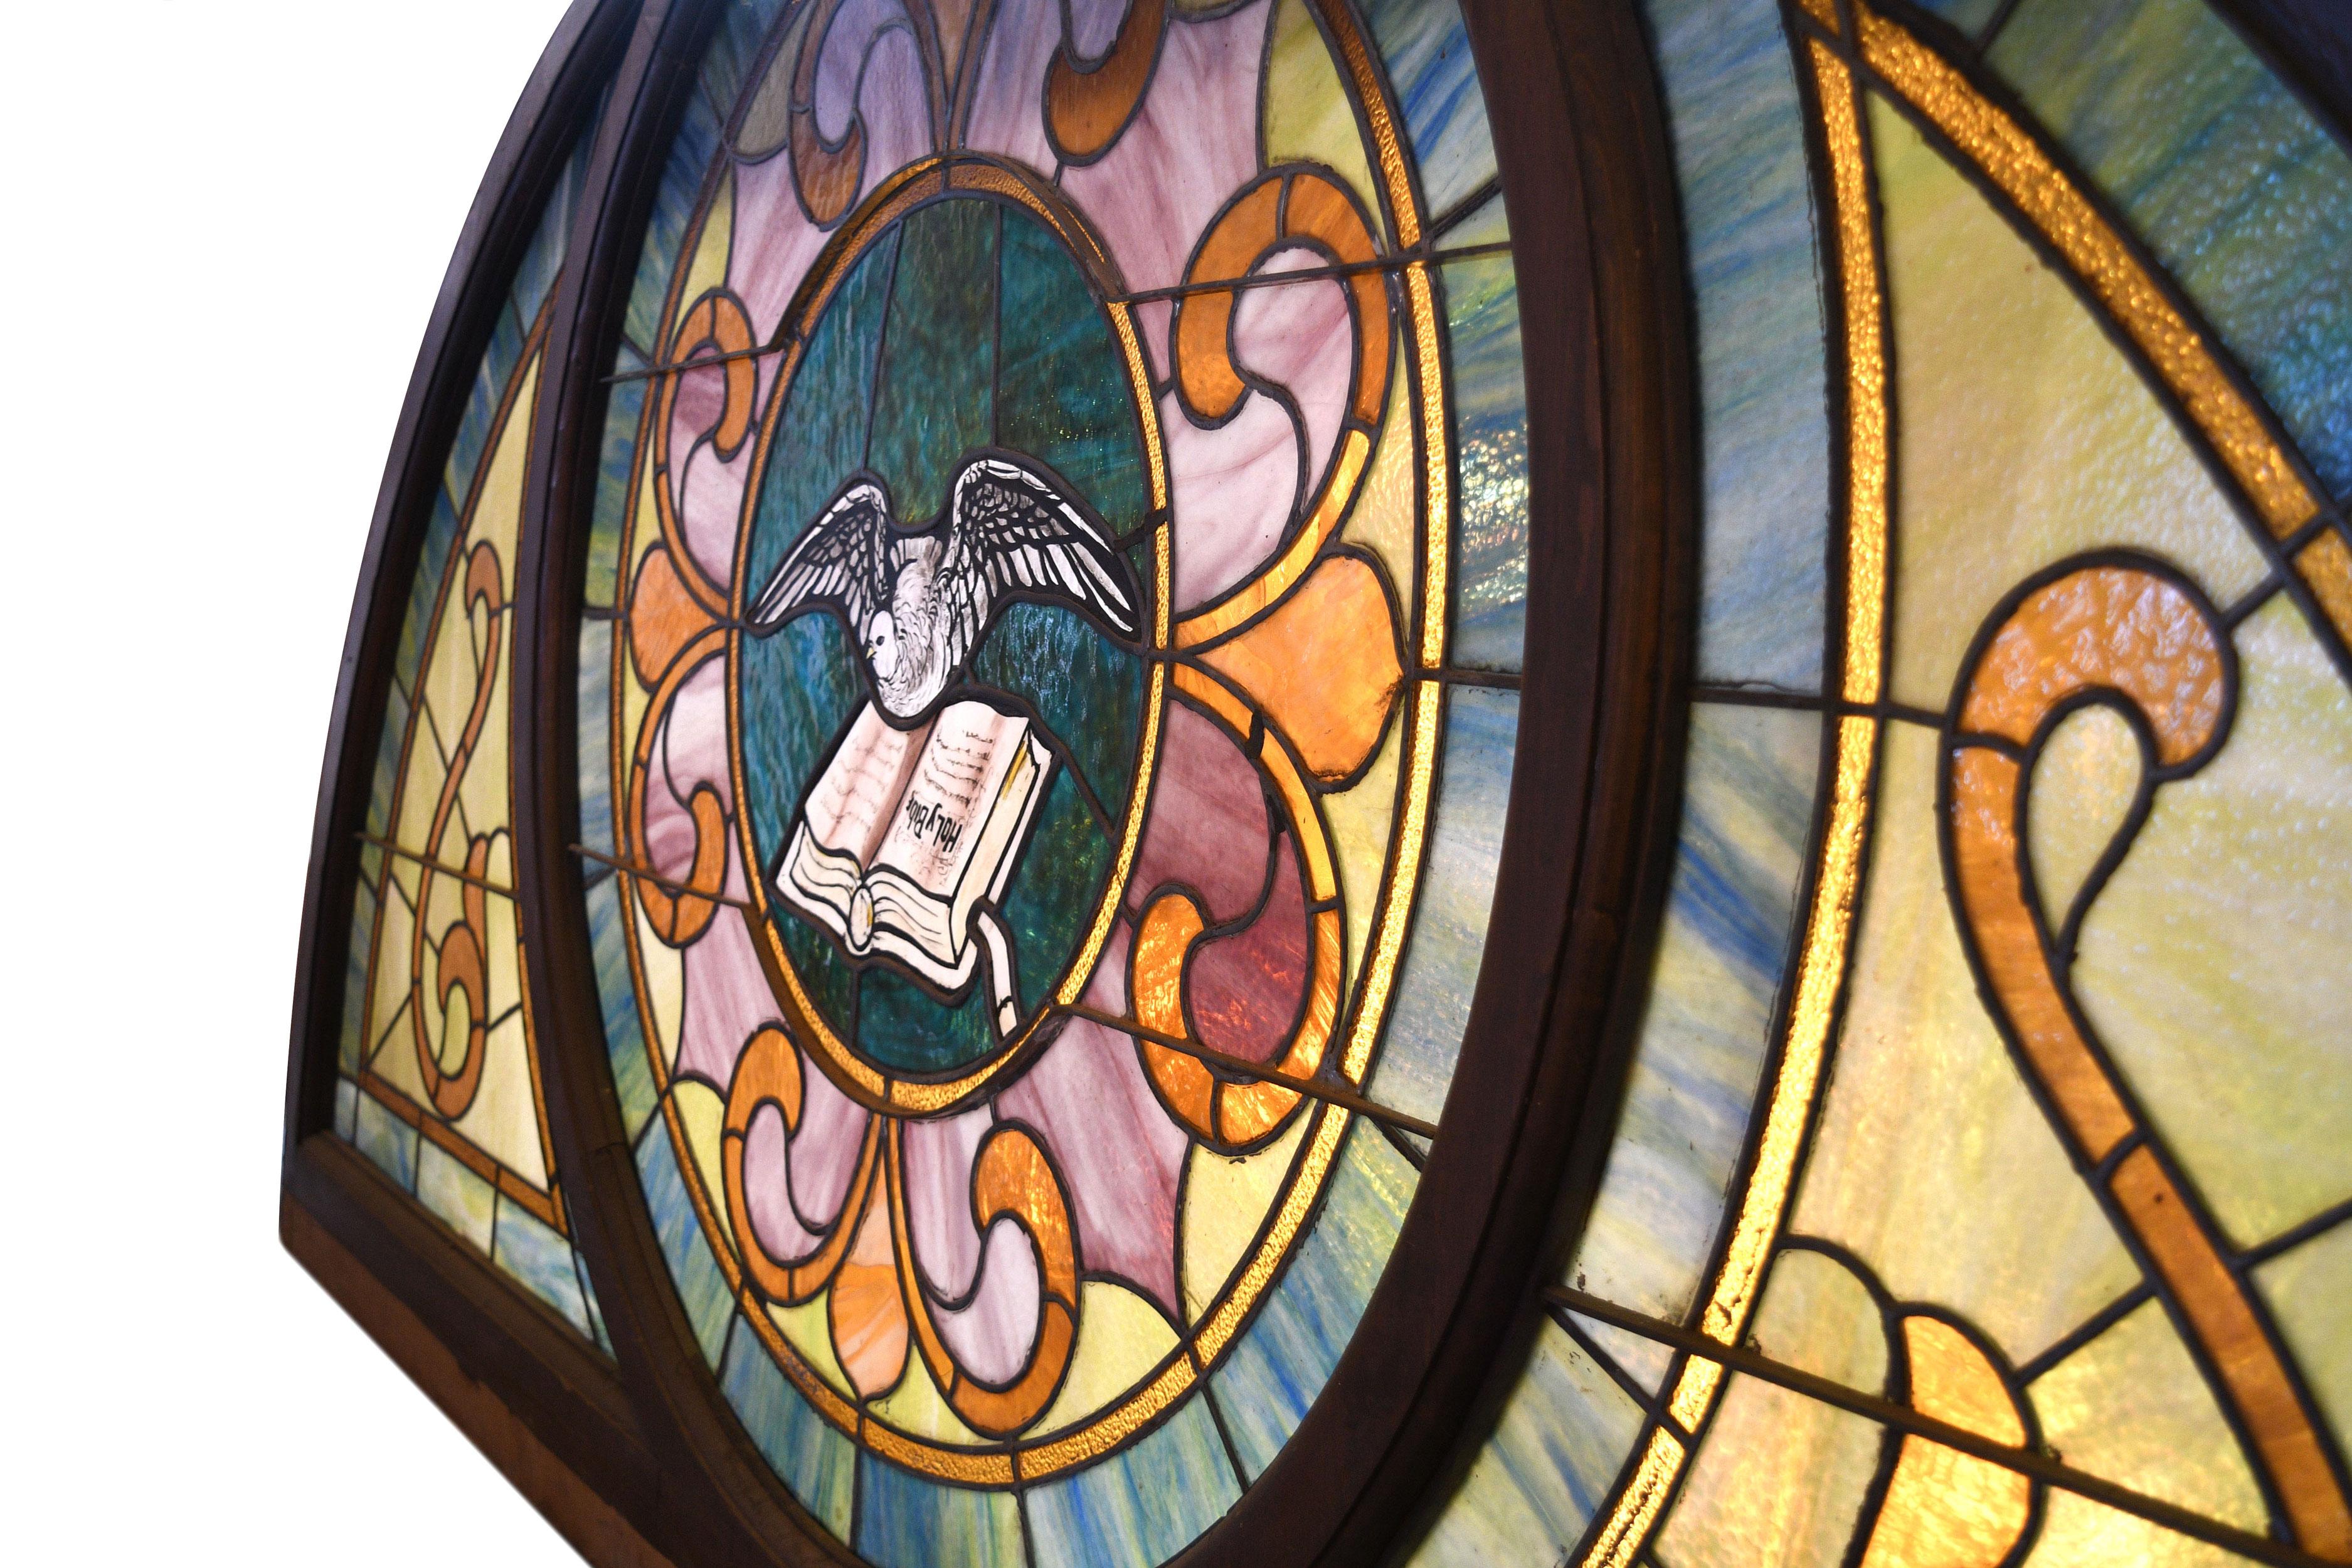 Beautiful pastel colored slag and stained glass window. The green/blue, orange/yellow and pinks all come together to make a soft and peaceful image. The dove and Bible motif at the center is hand painted. It comes together as a whole through organic